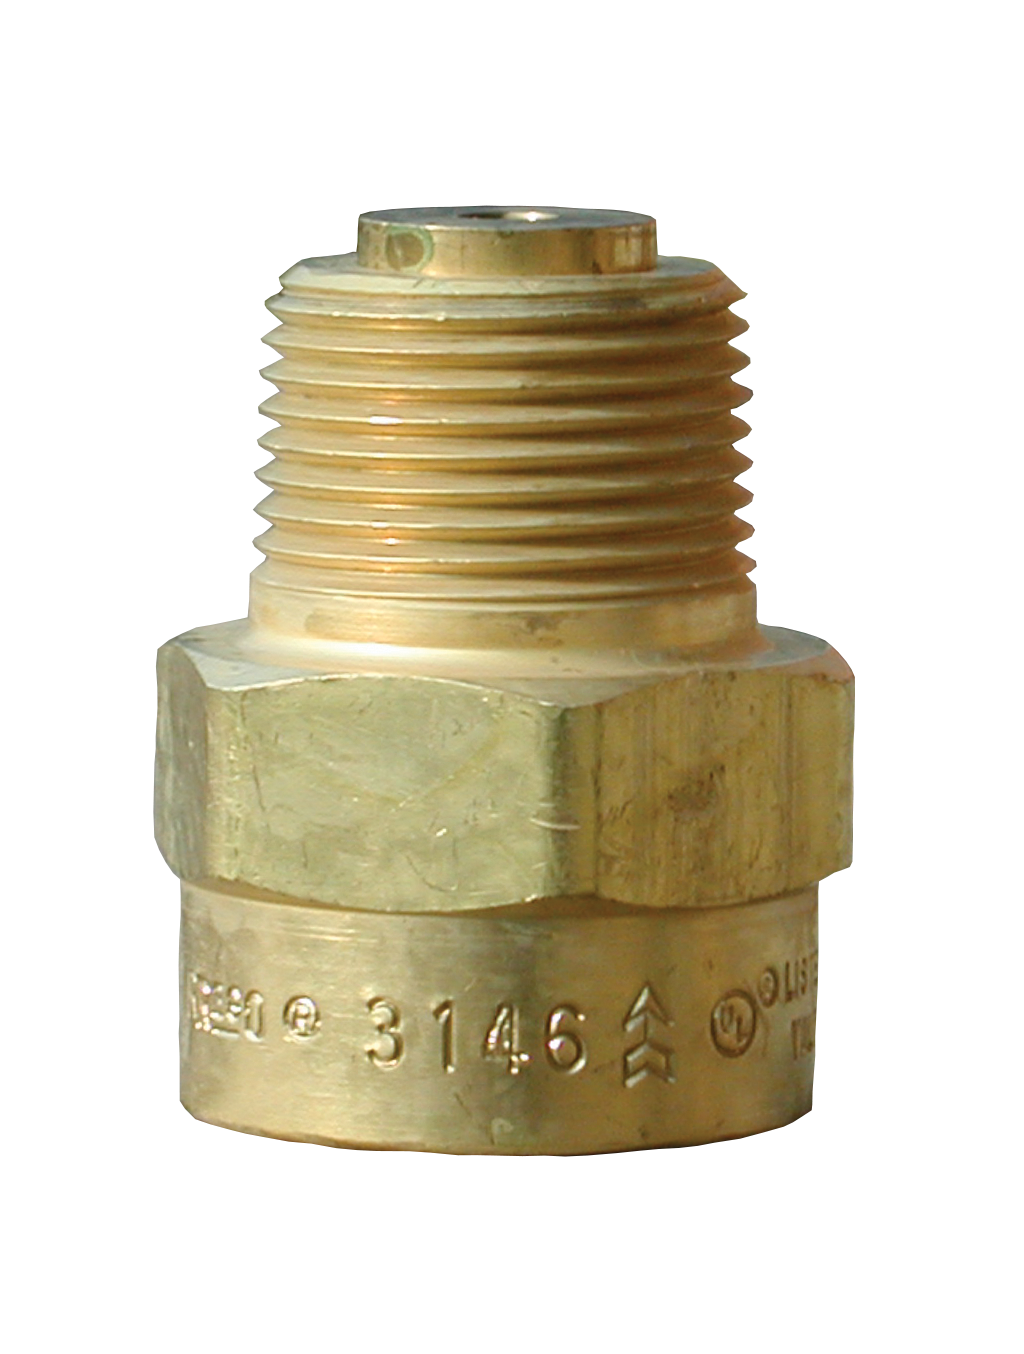 VLV BKCHK .75FPX.75MP - Back Check Valves for Container or Line Applications